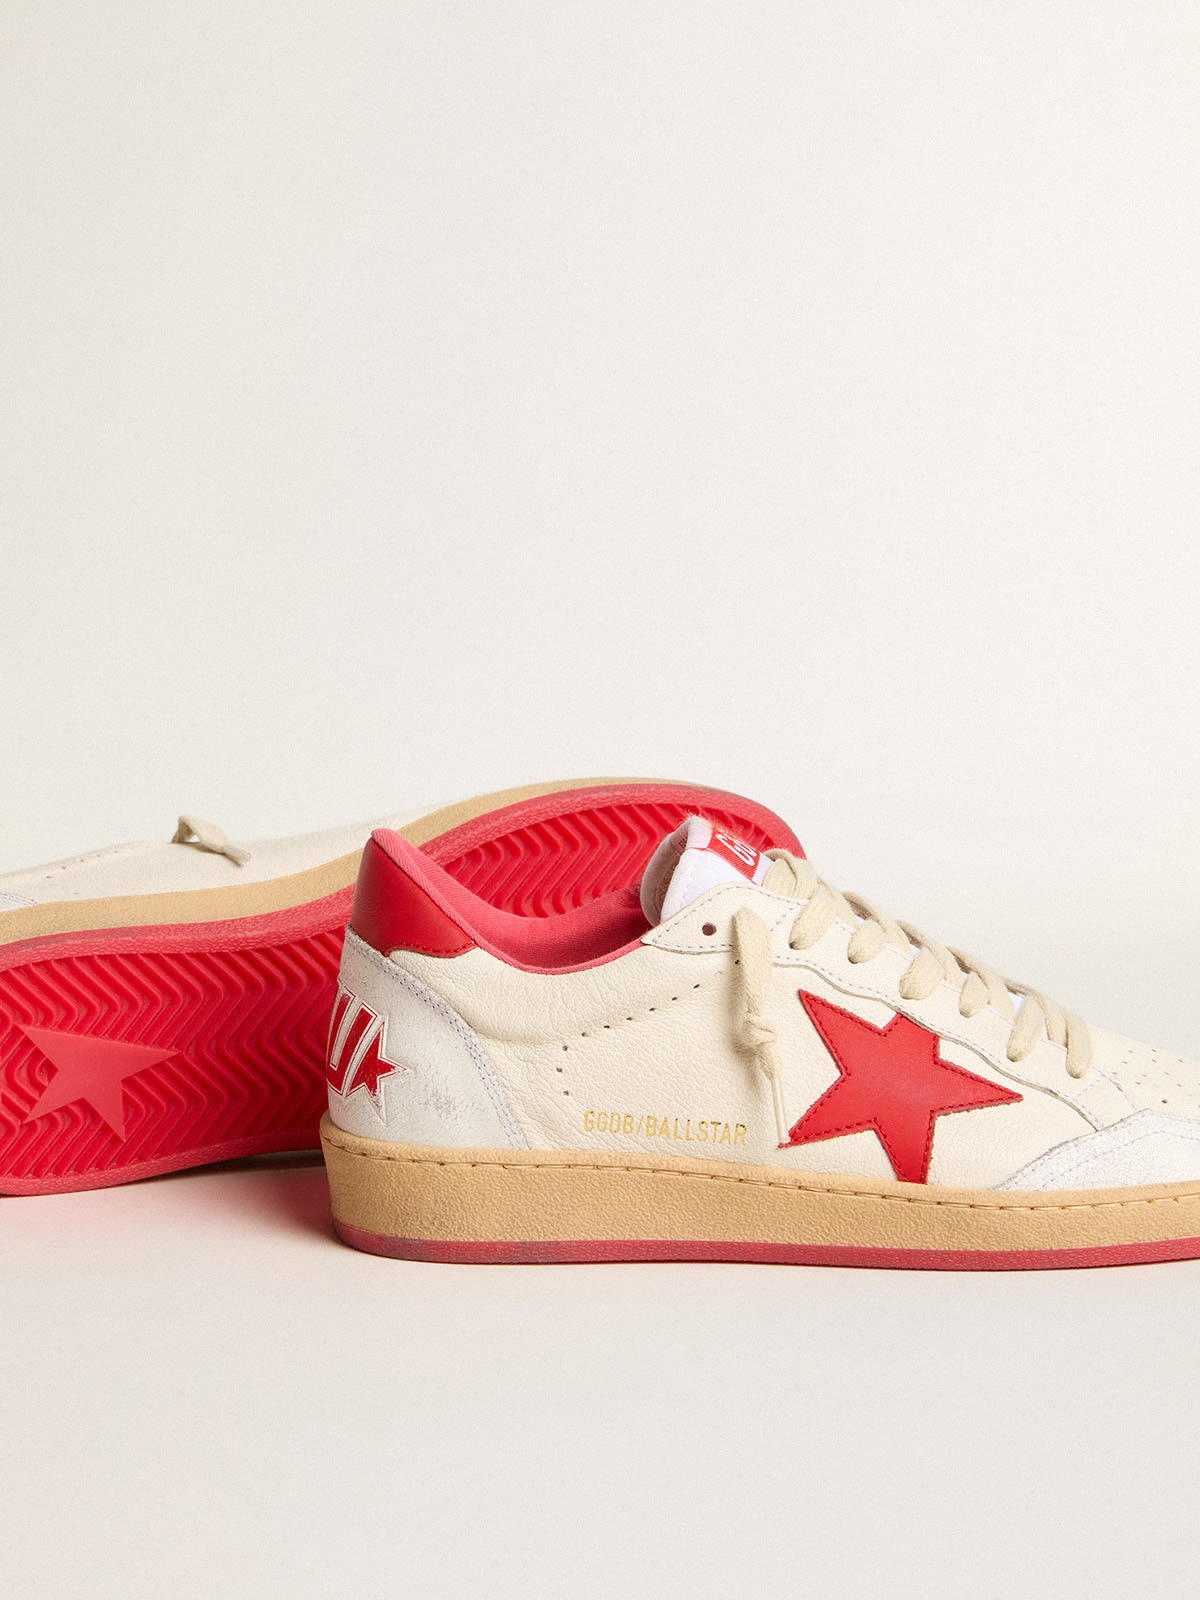 Women’s Ball Star  Wishes in white leather with a red star and heel tab - 4